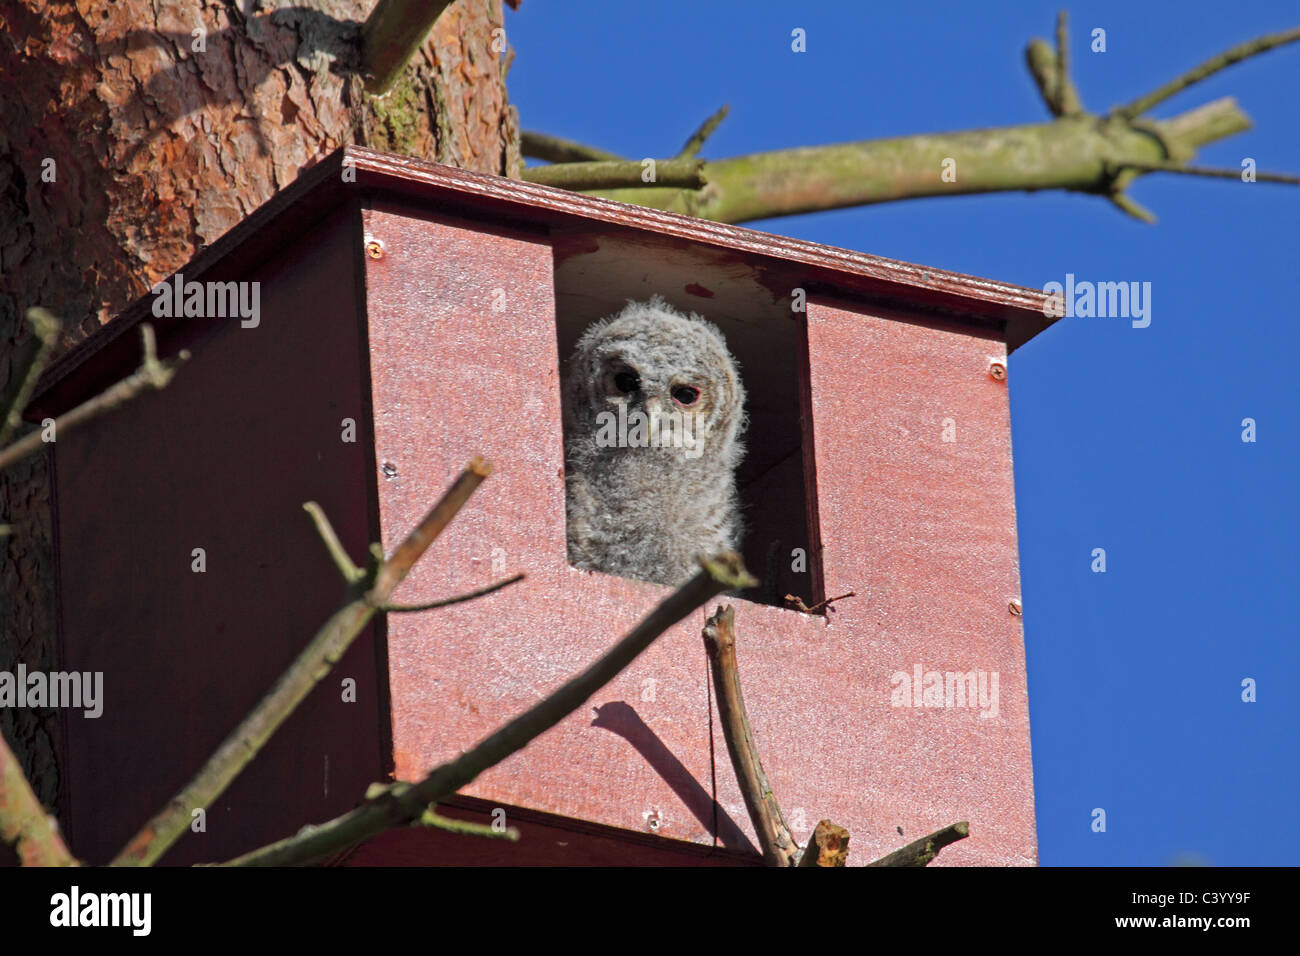 Young Tawny owl in nestbox Stock Photo